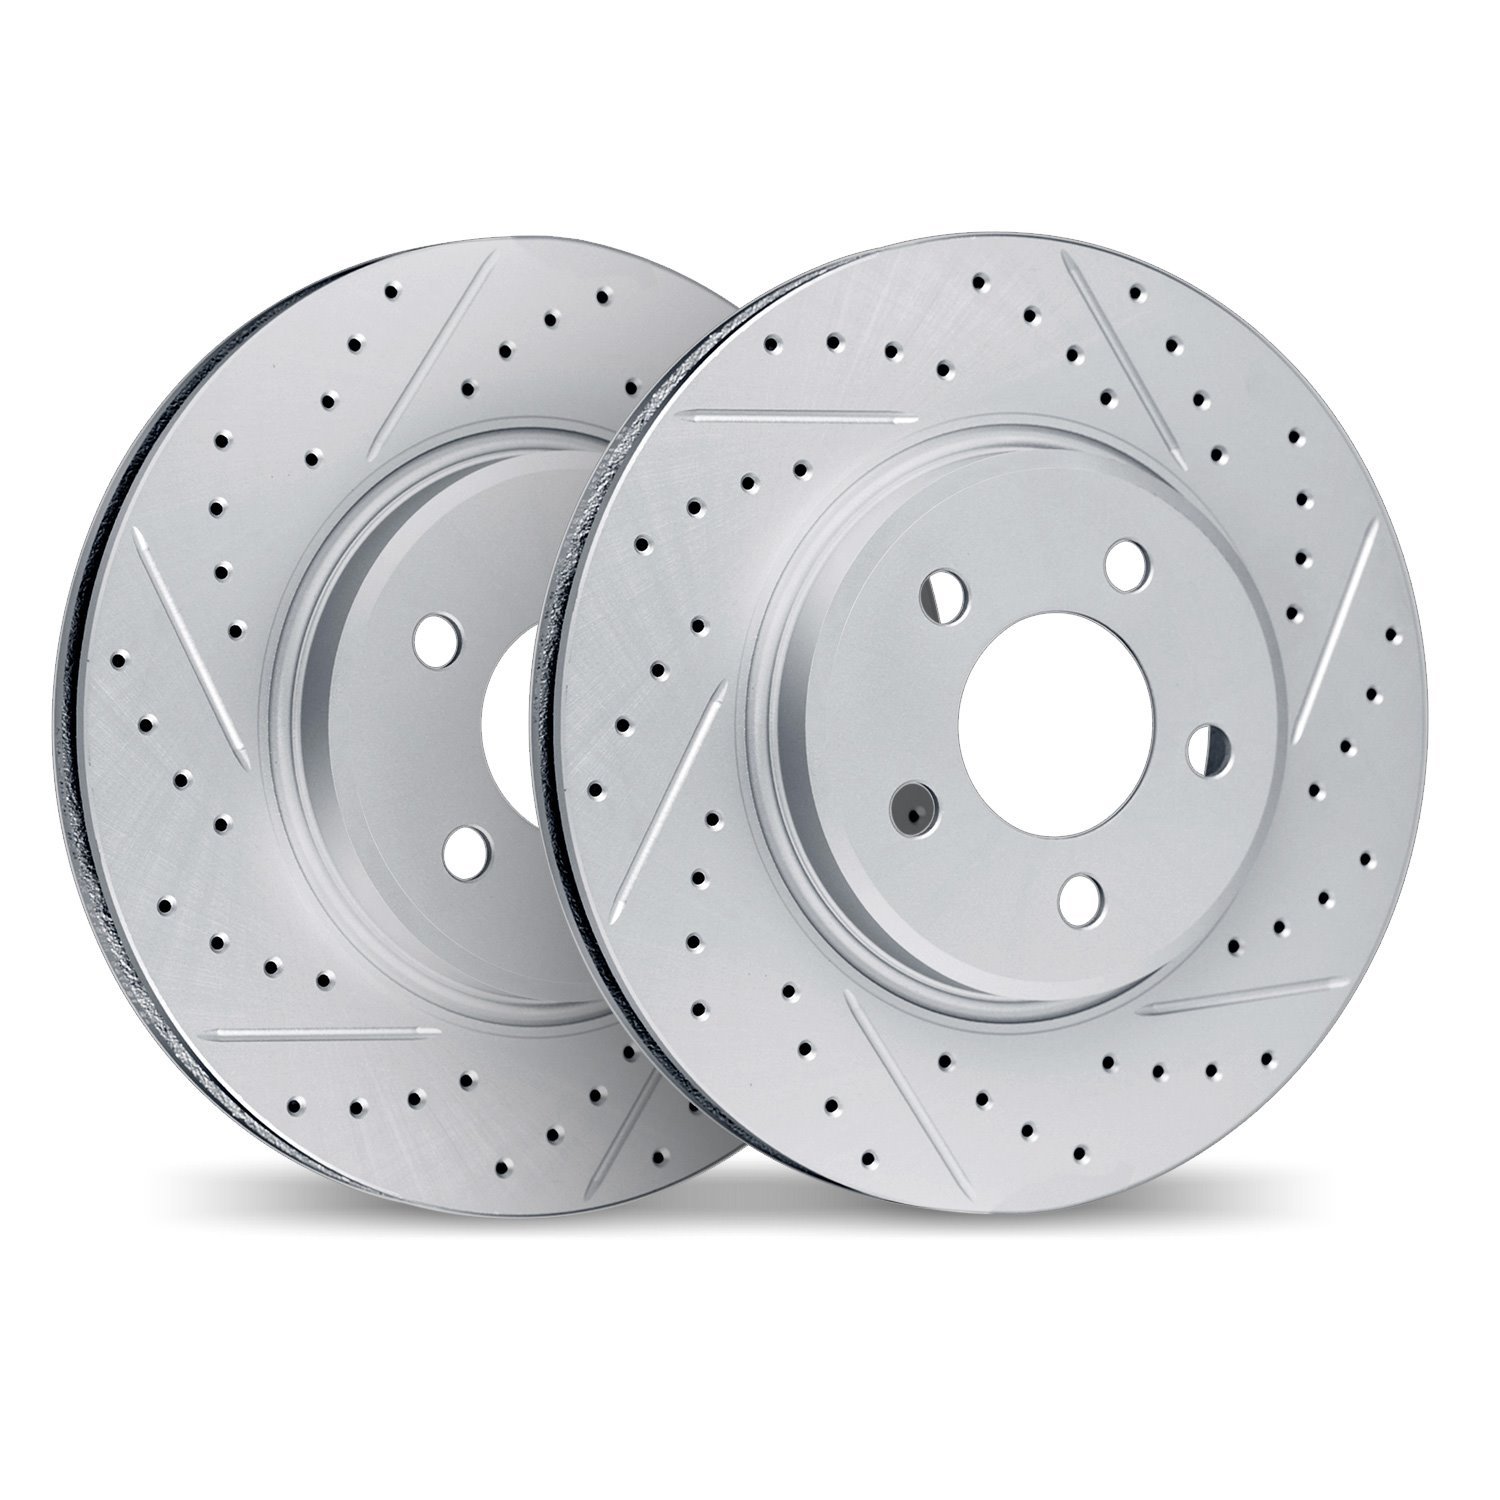 2002-45008 Geoperformance Drilled/Slotted Brake Rotors, 1994-2001 GM, Position: Front